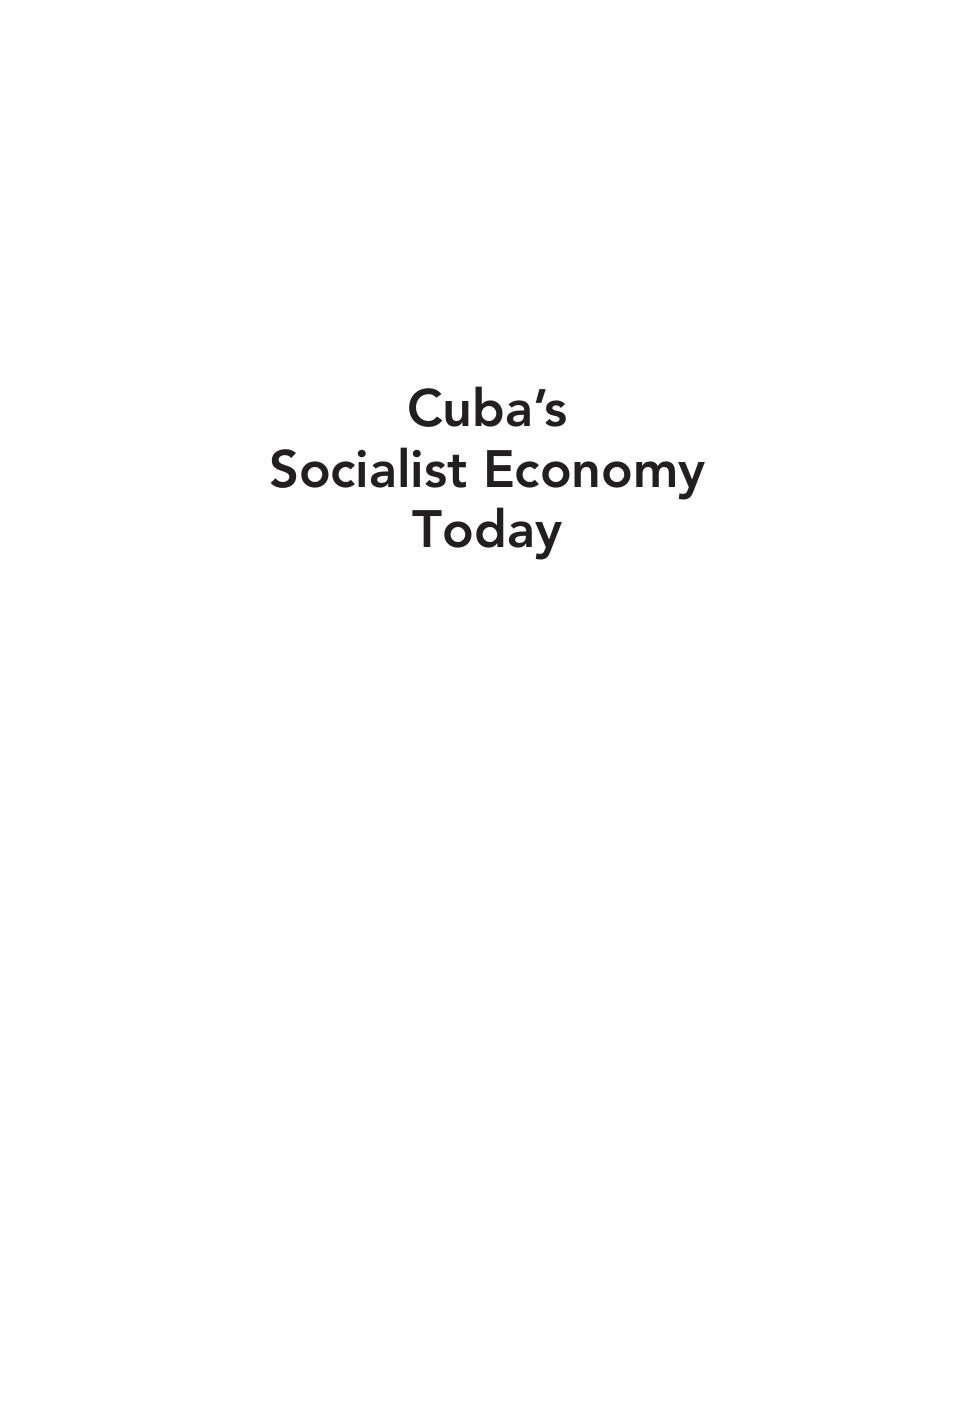 Cuba's Socialist Economy Today : Navigating Challenges and Change by Paolo Spadoni